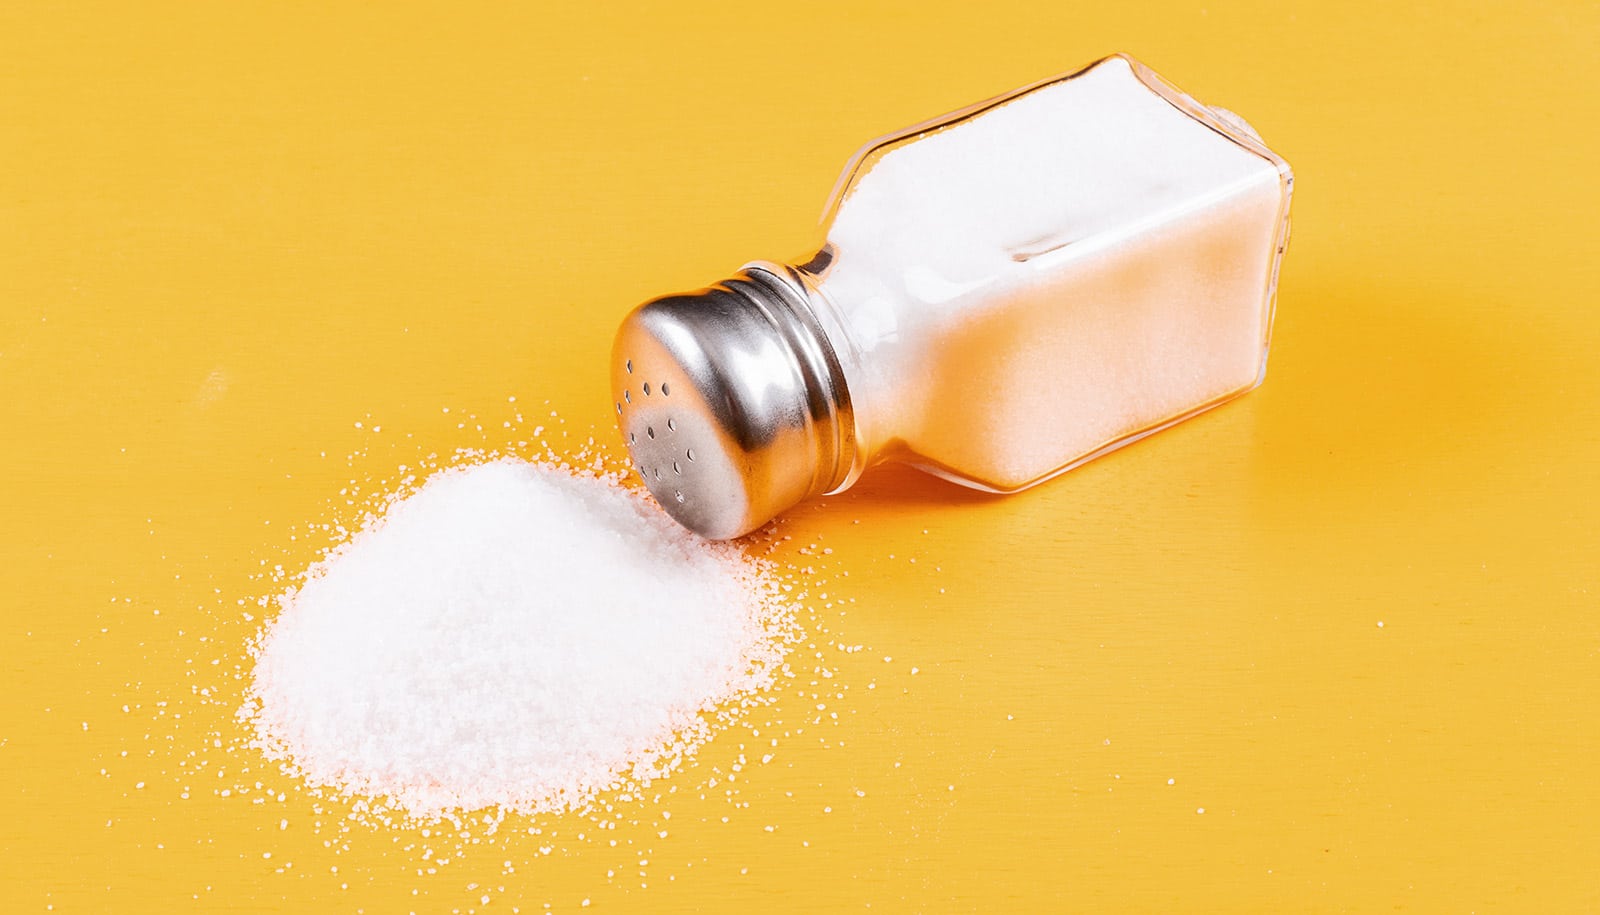 Table salt is really good for recycling plastic